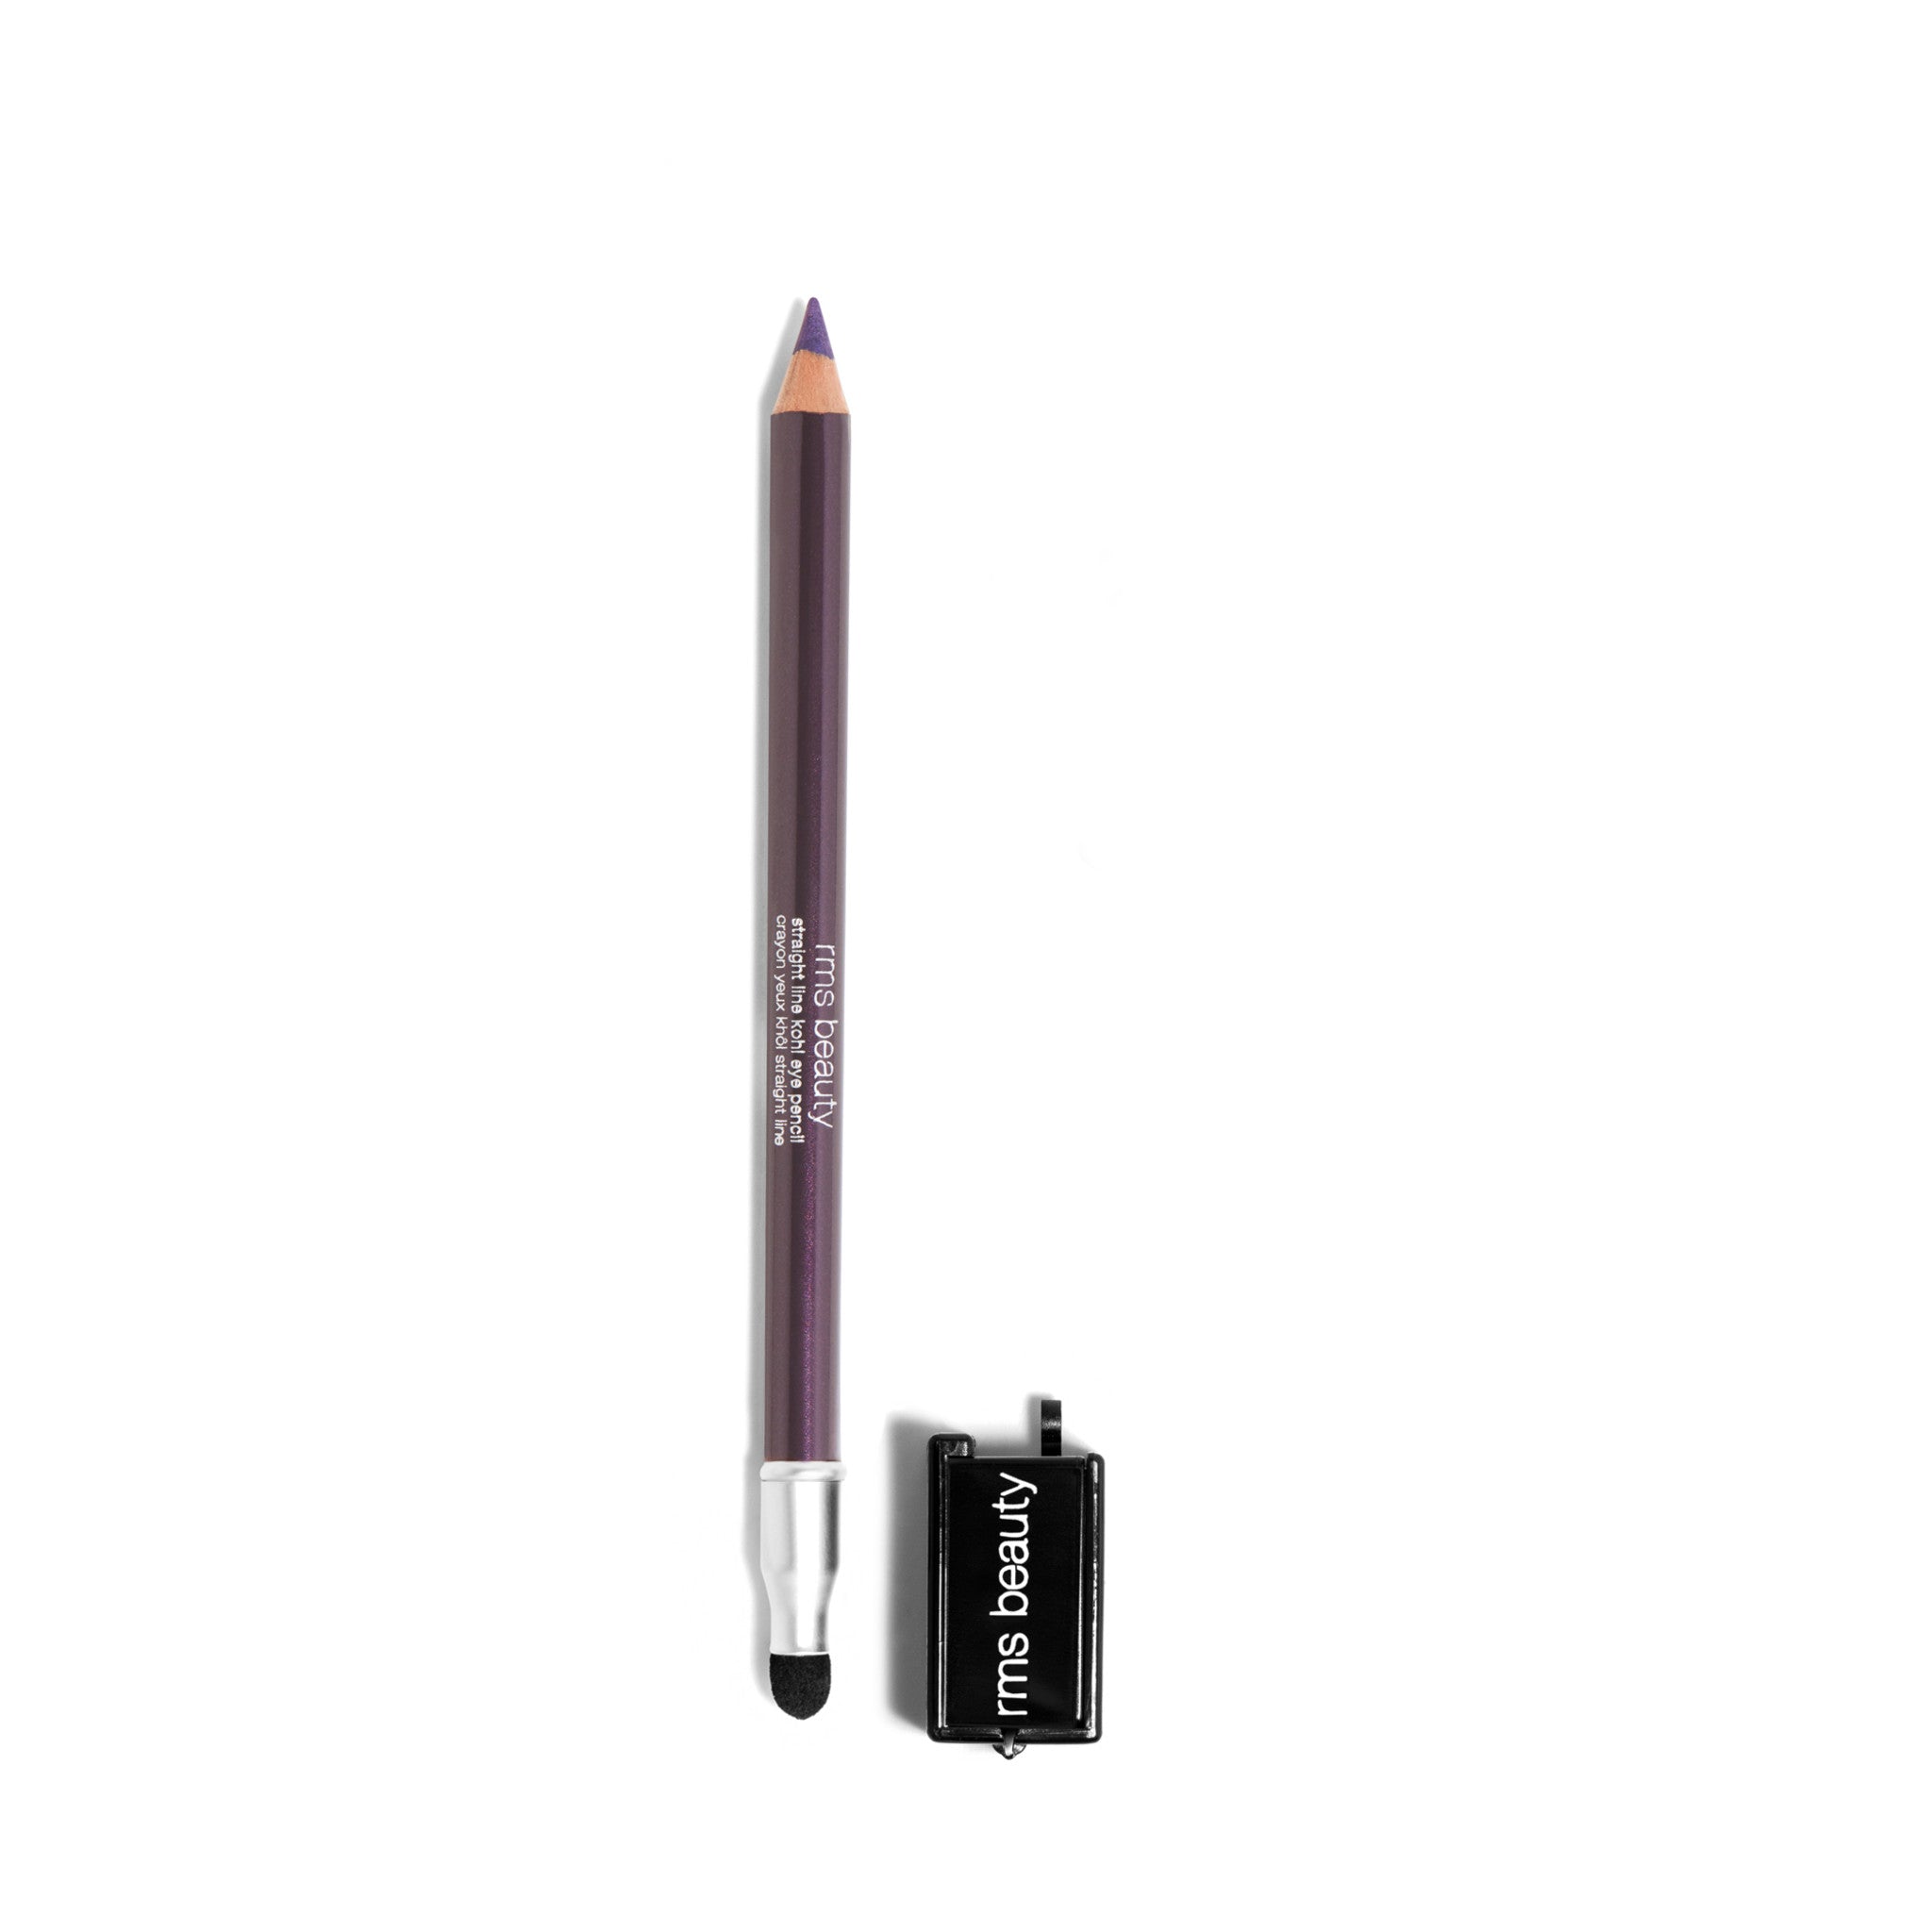 RMS Beauty Straight Line Kohl Eye Pencil Definition Color/Shade variant: Plum main image.